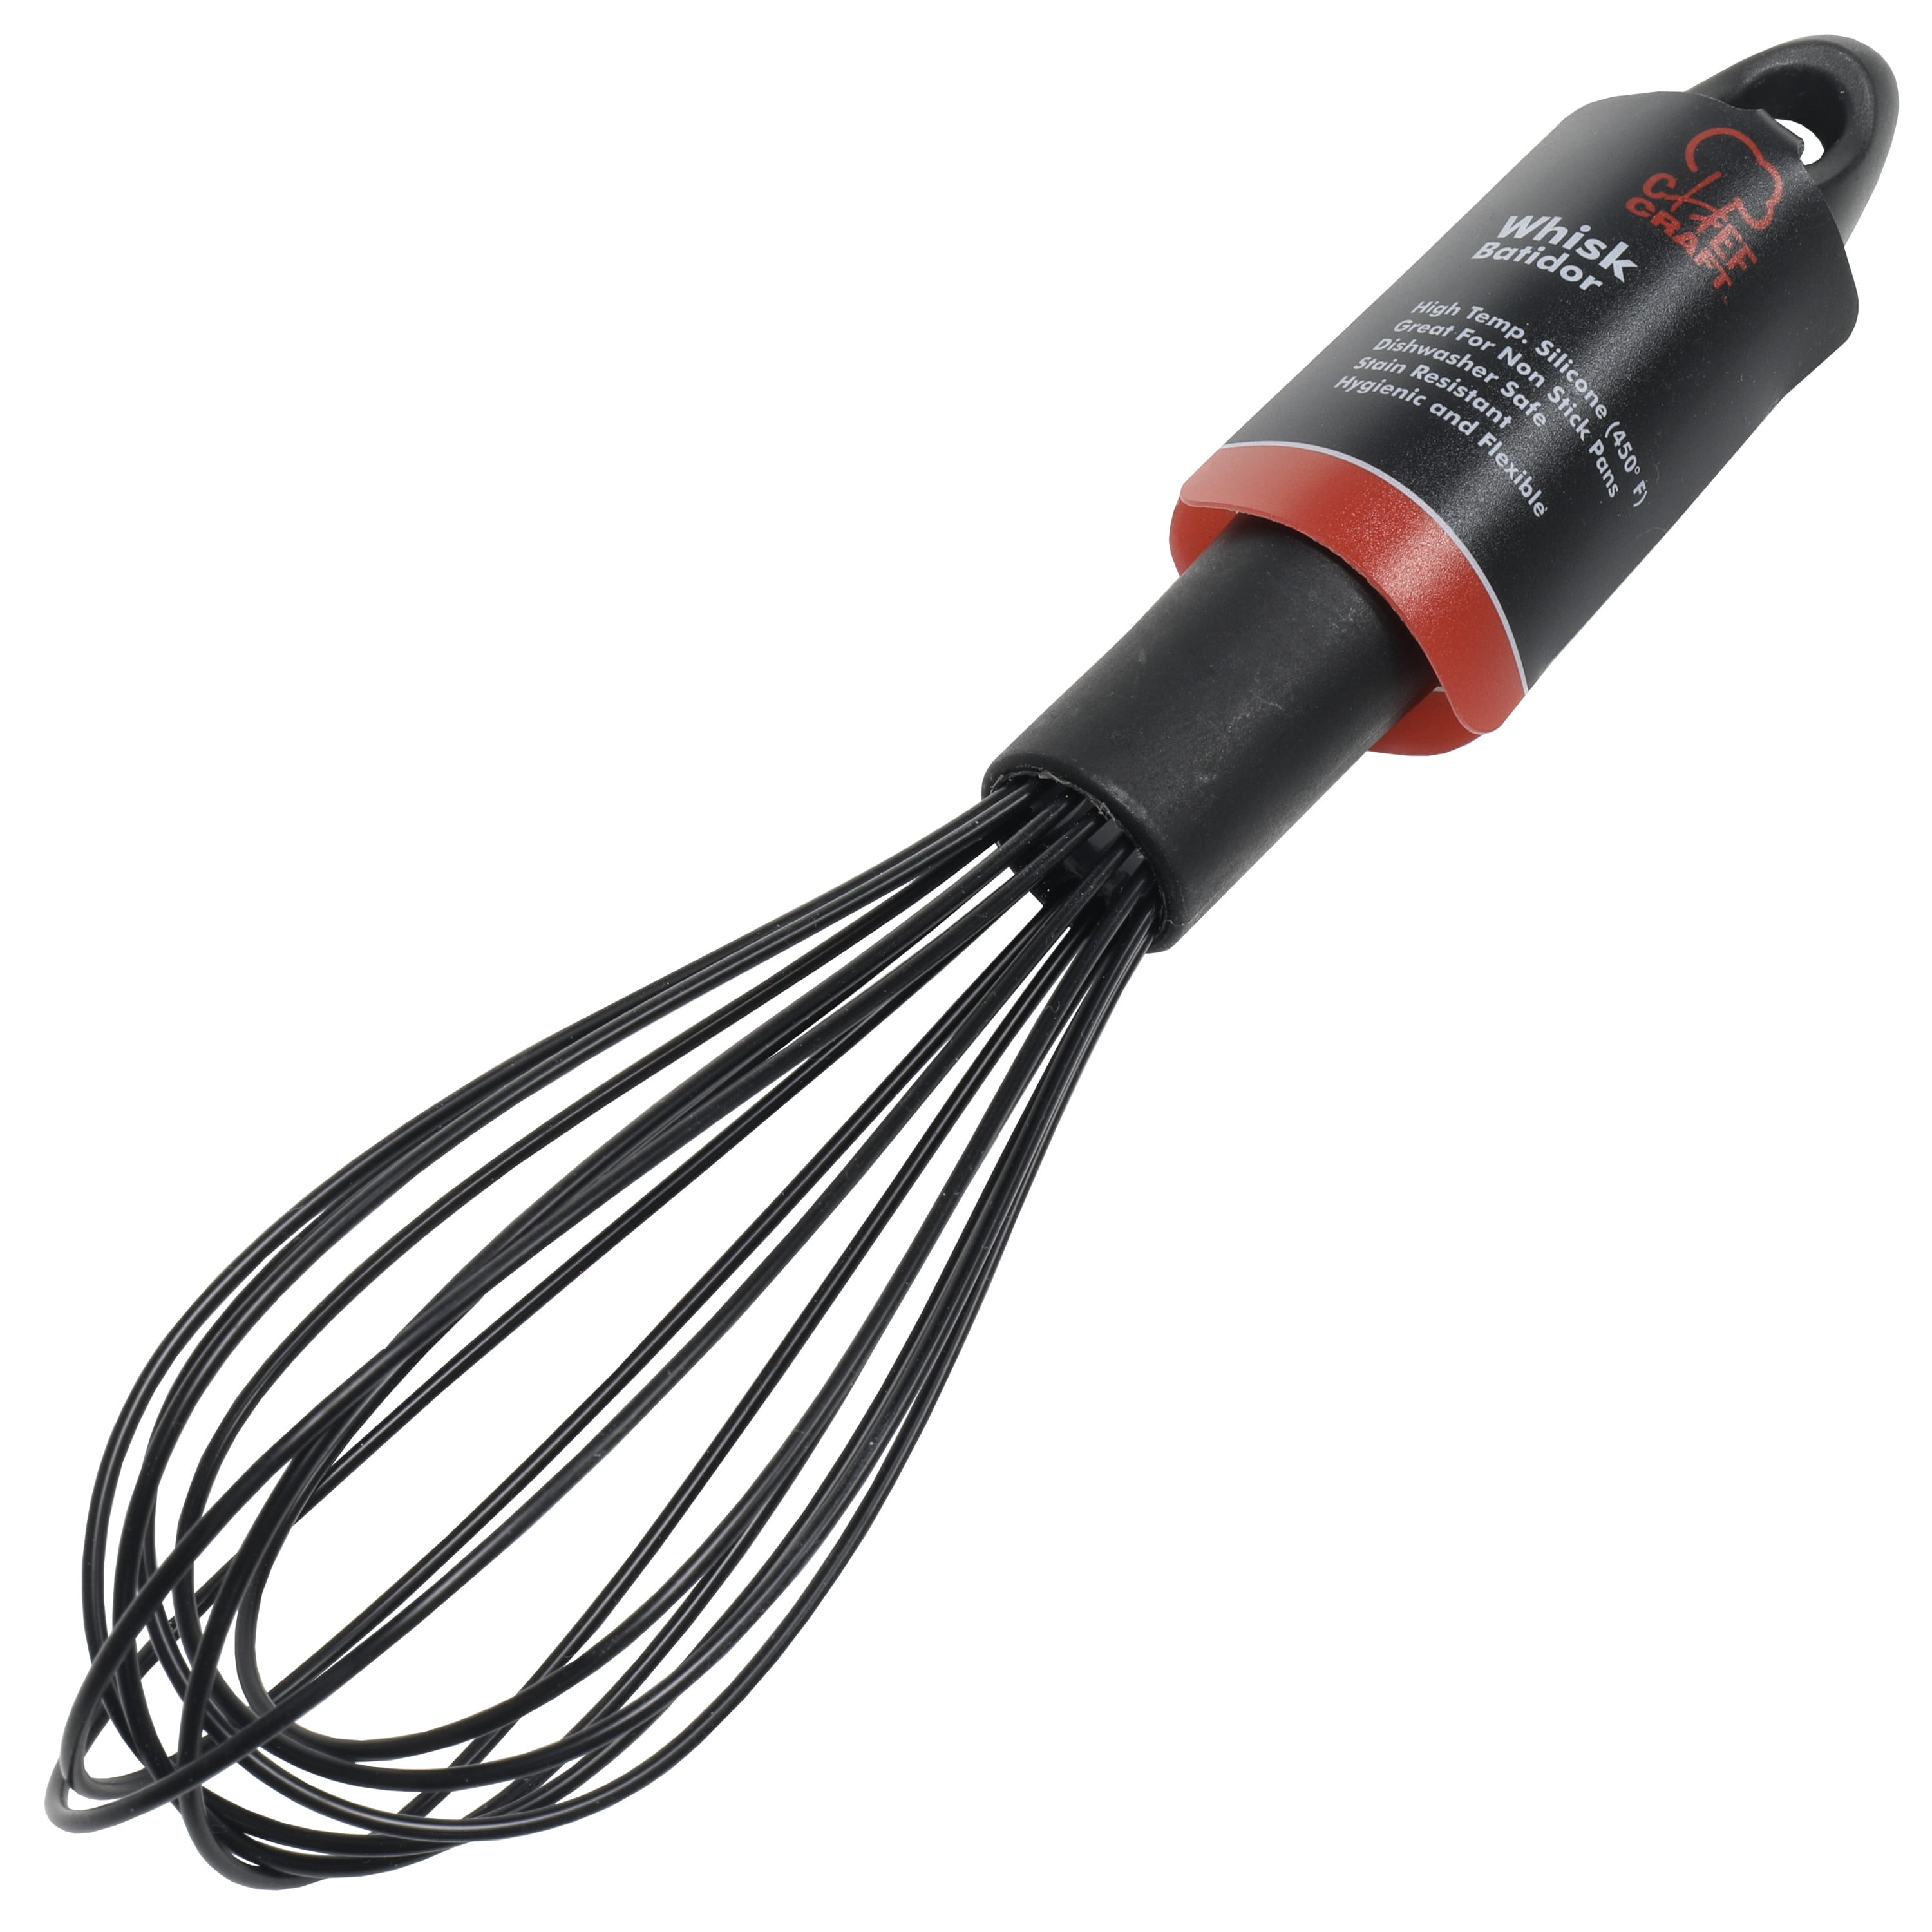 Cuisipro 10 Red Silicone Coated Flat Whisk - Austin, Texas